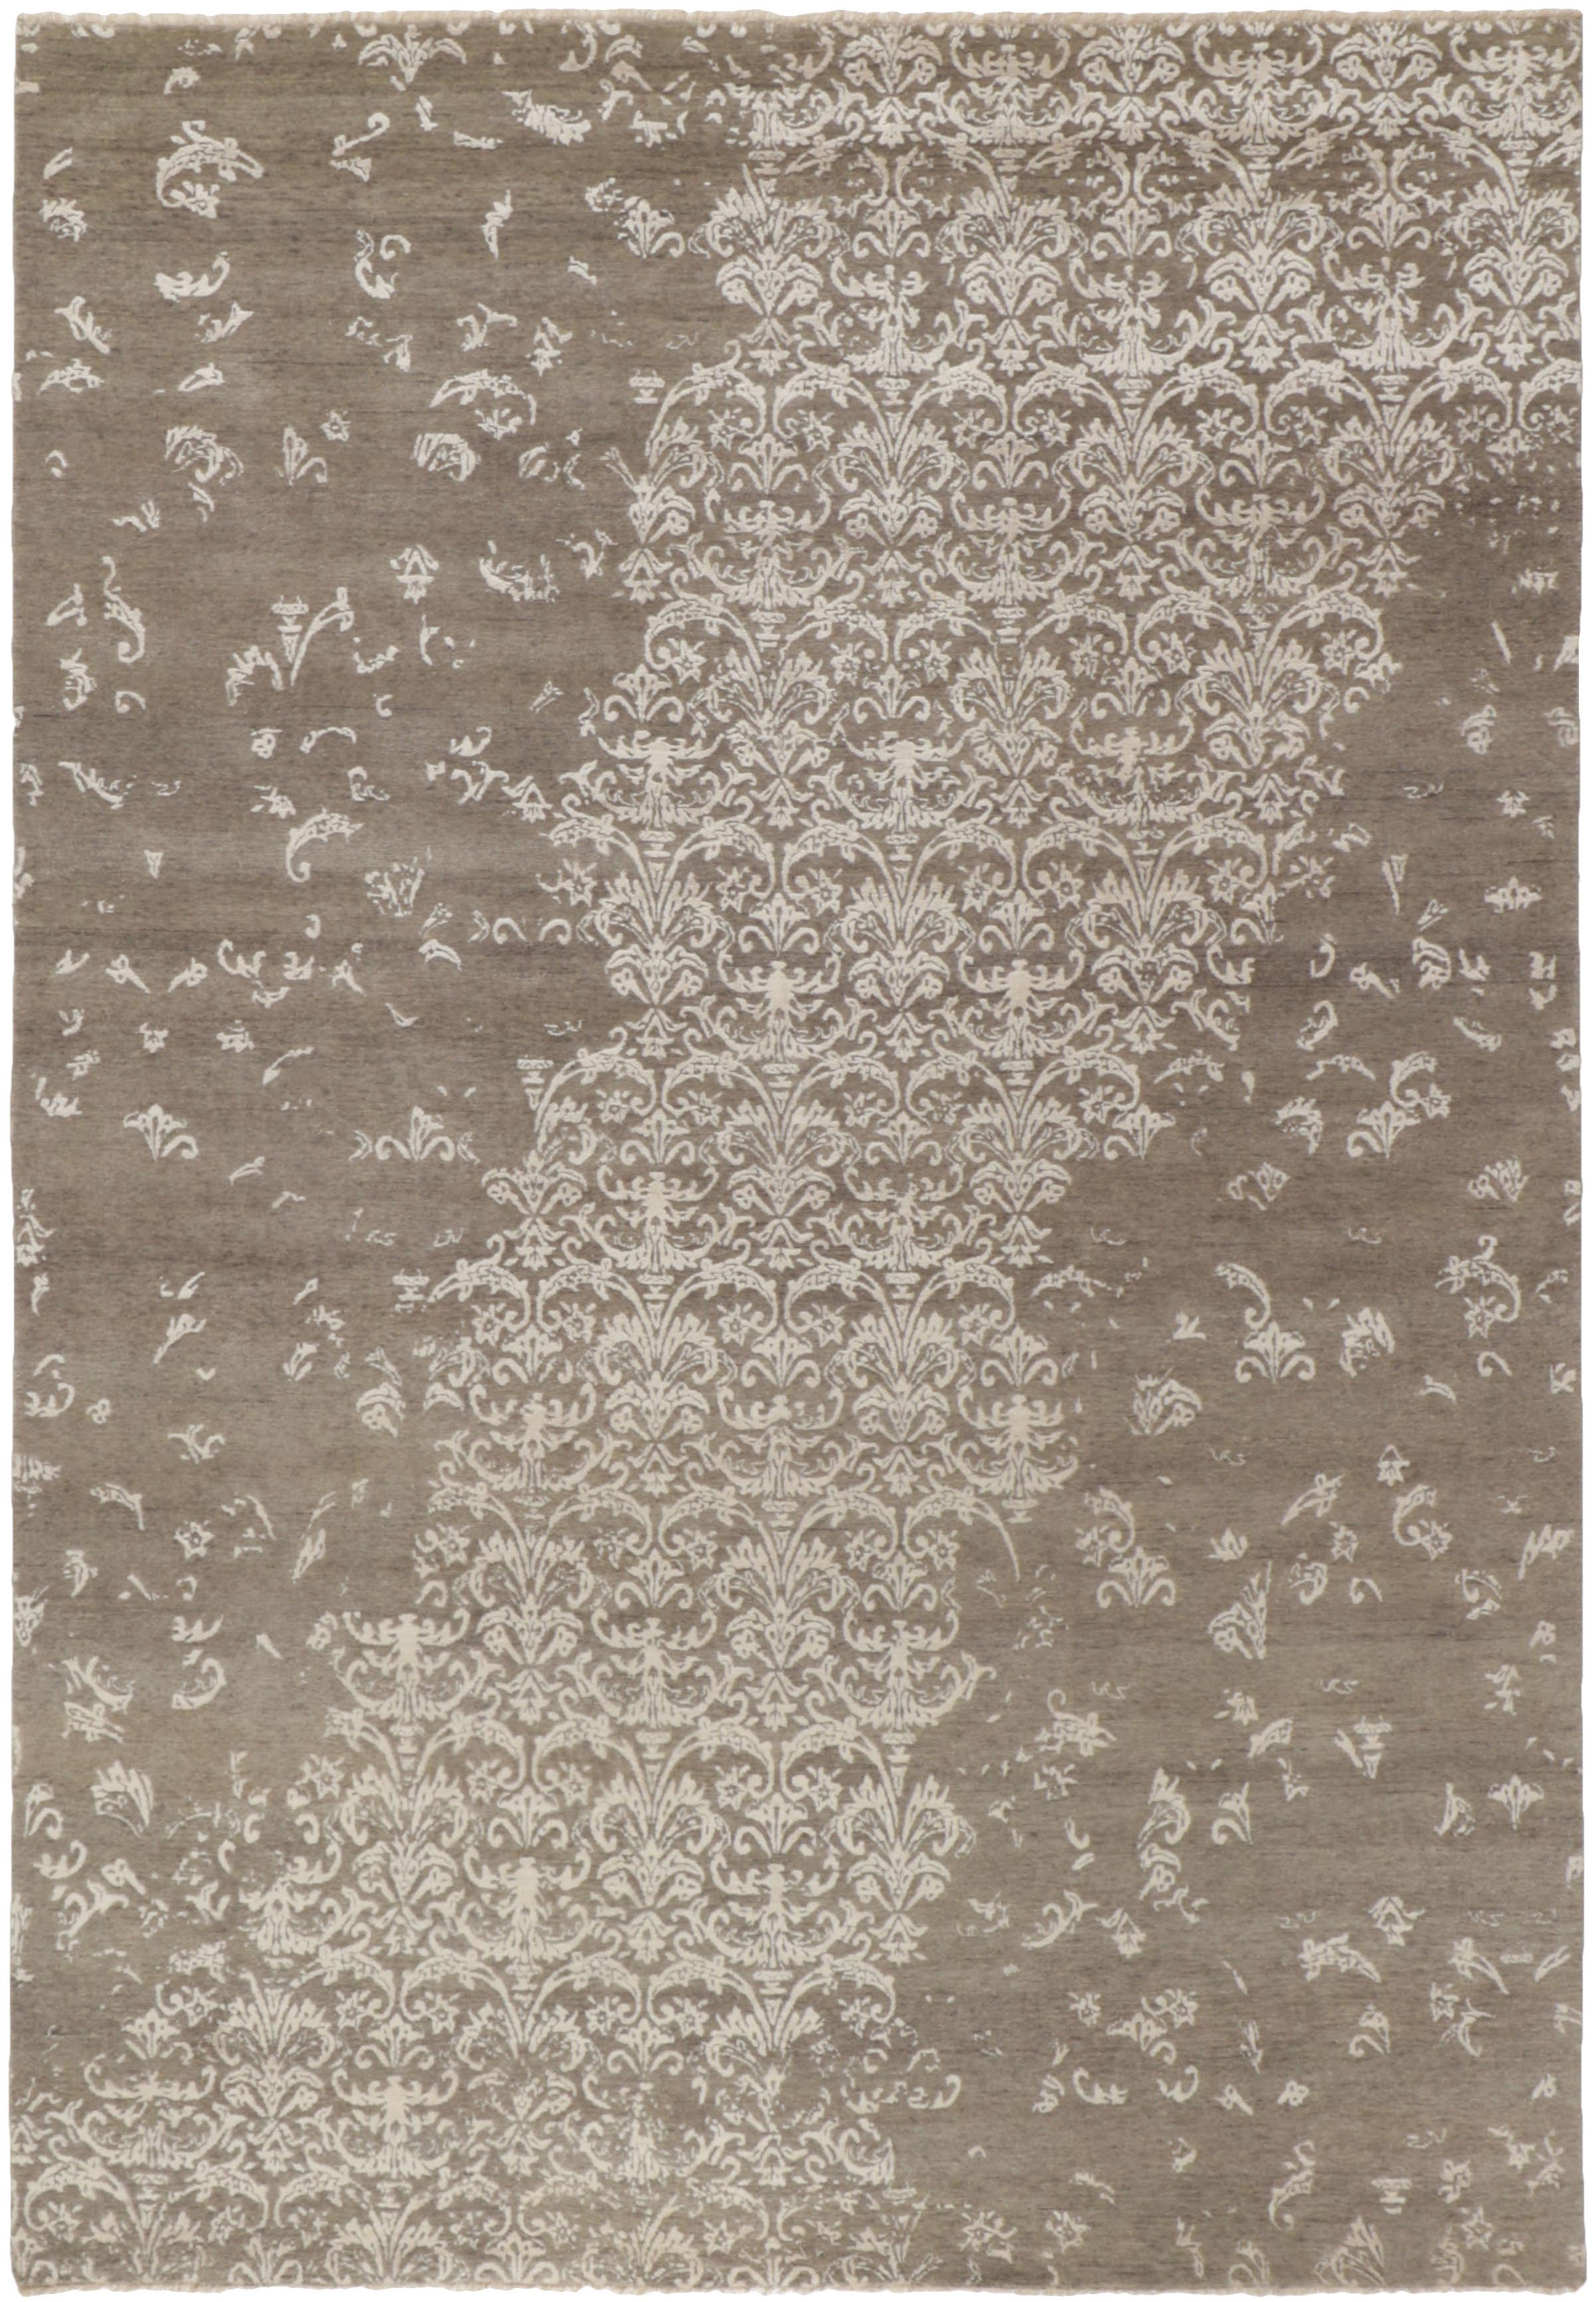 Authentic oriental rug with a damask pattern in beige